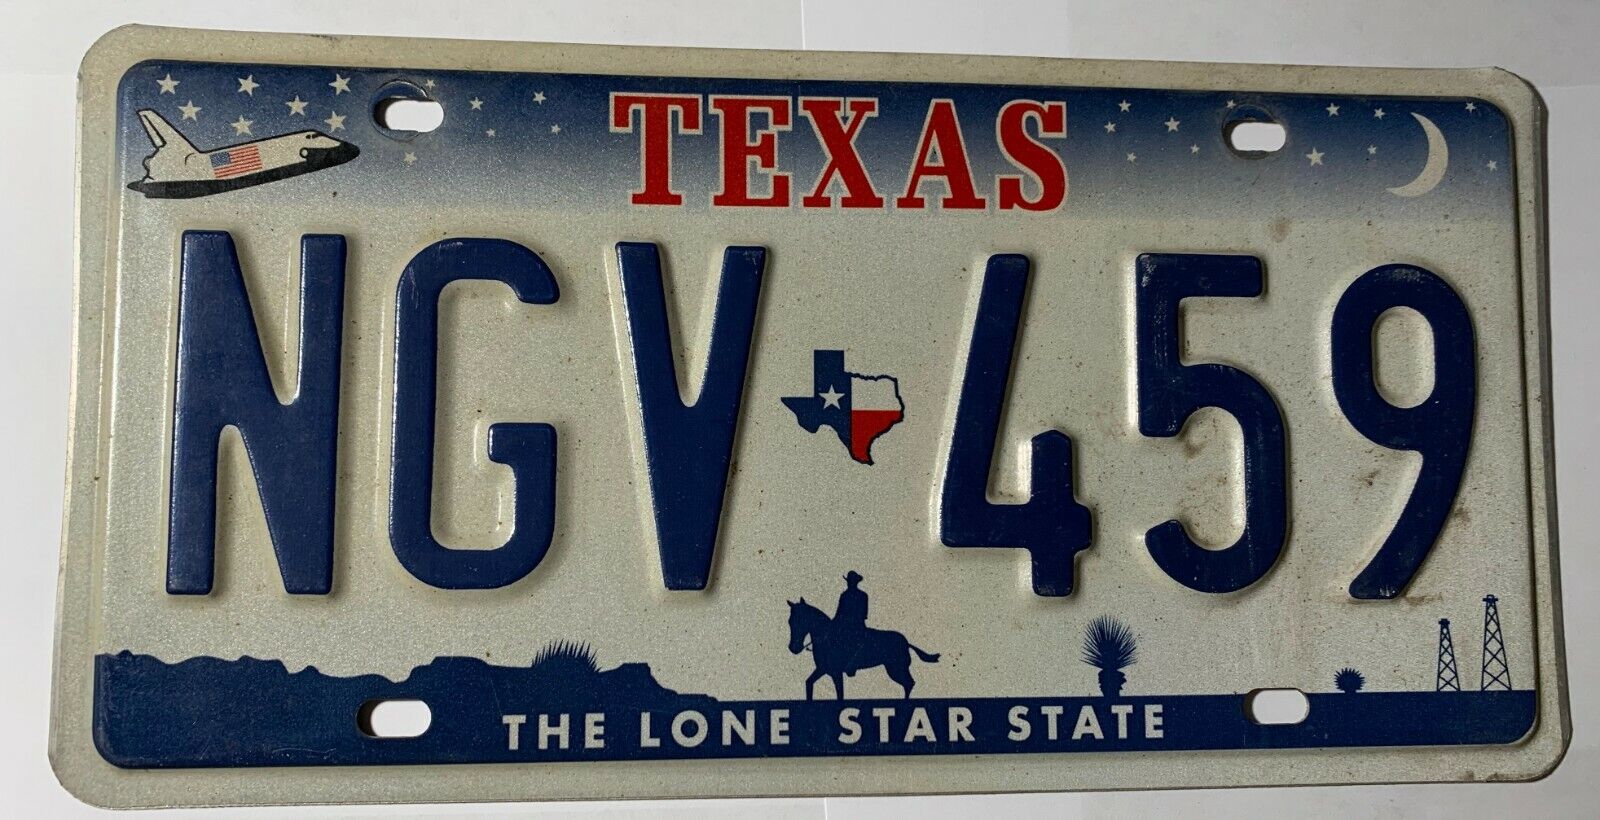 LICENSE PLATE BLOWOUT: 1990s Texas Plate NGV 459 Nice Shape